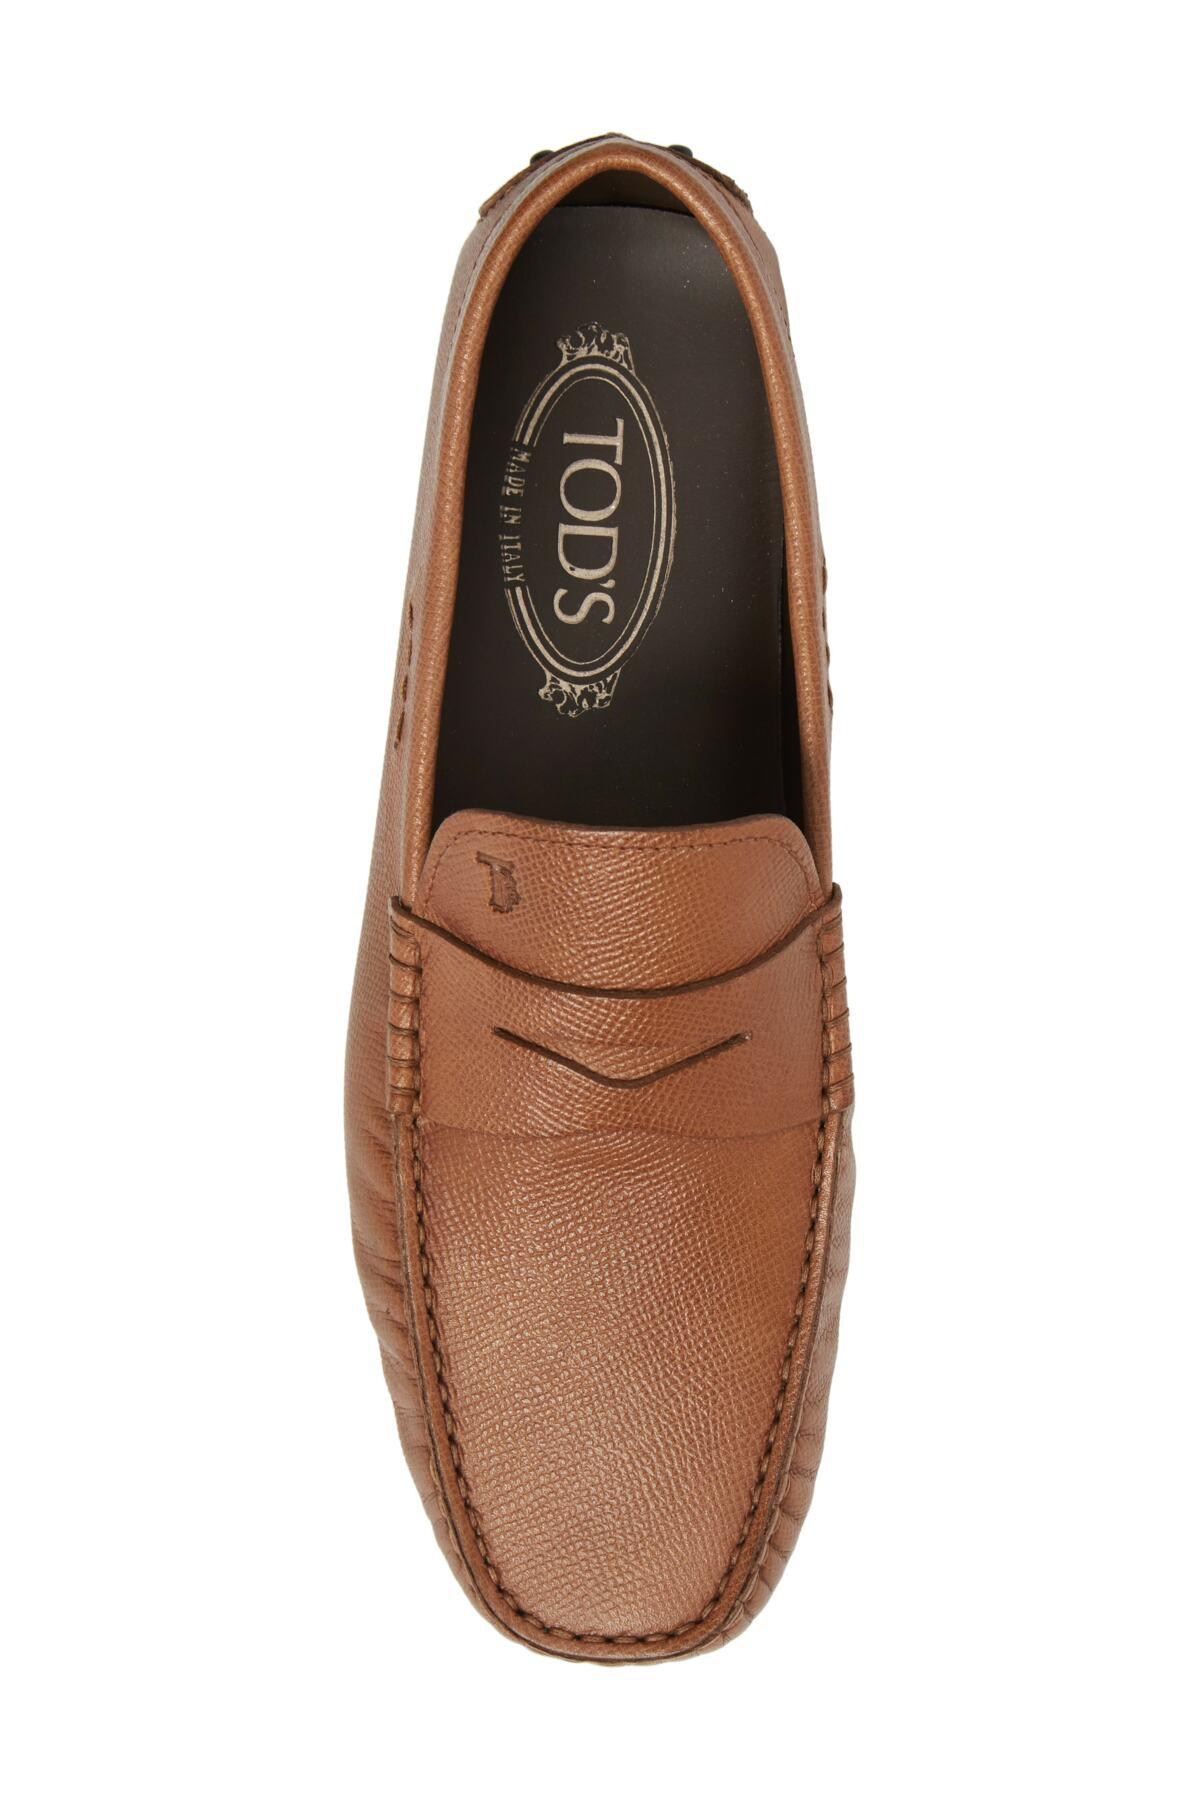 Tod's Leather City Driving Shoe in Tan Leather (Brown) for Men - Lyst